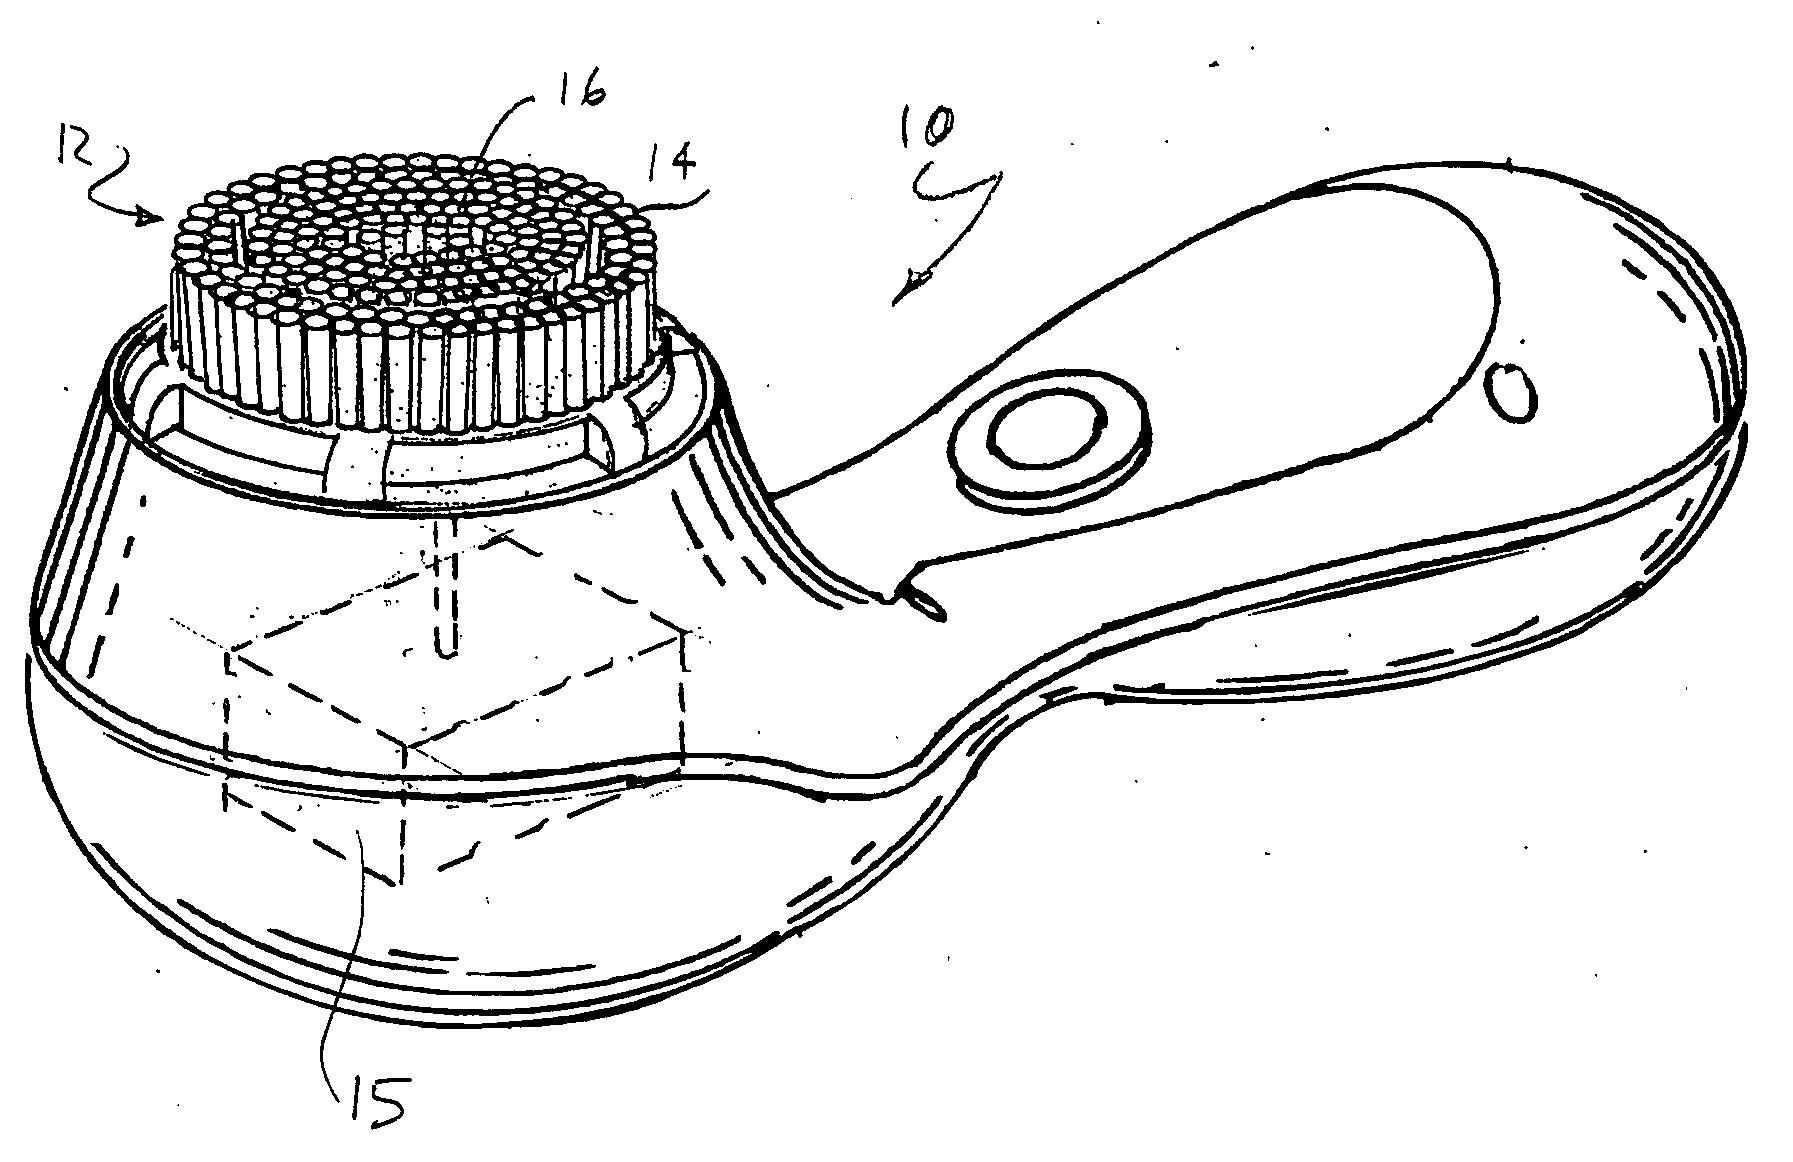 Brush configuration for a powered skin cleansing brush appliance